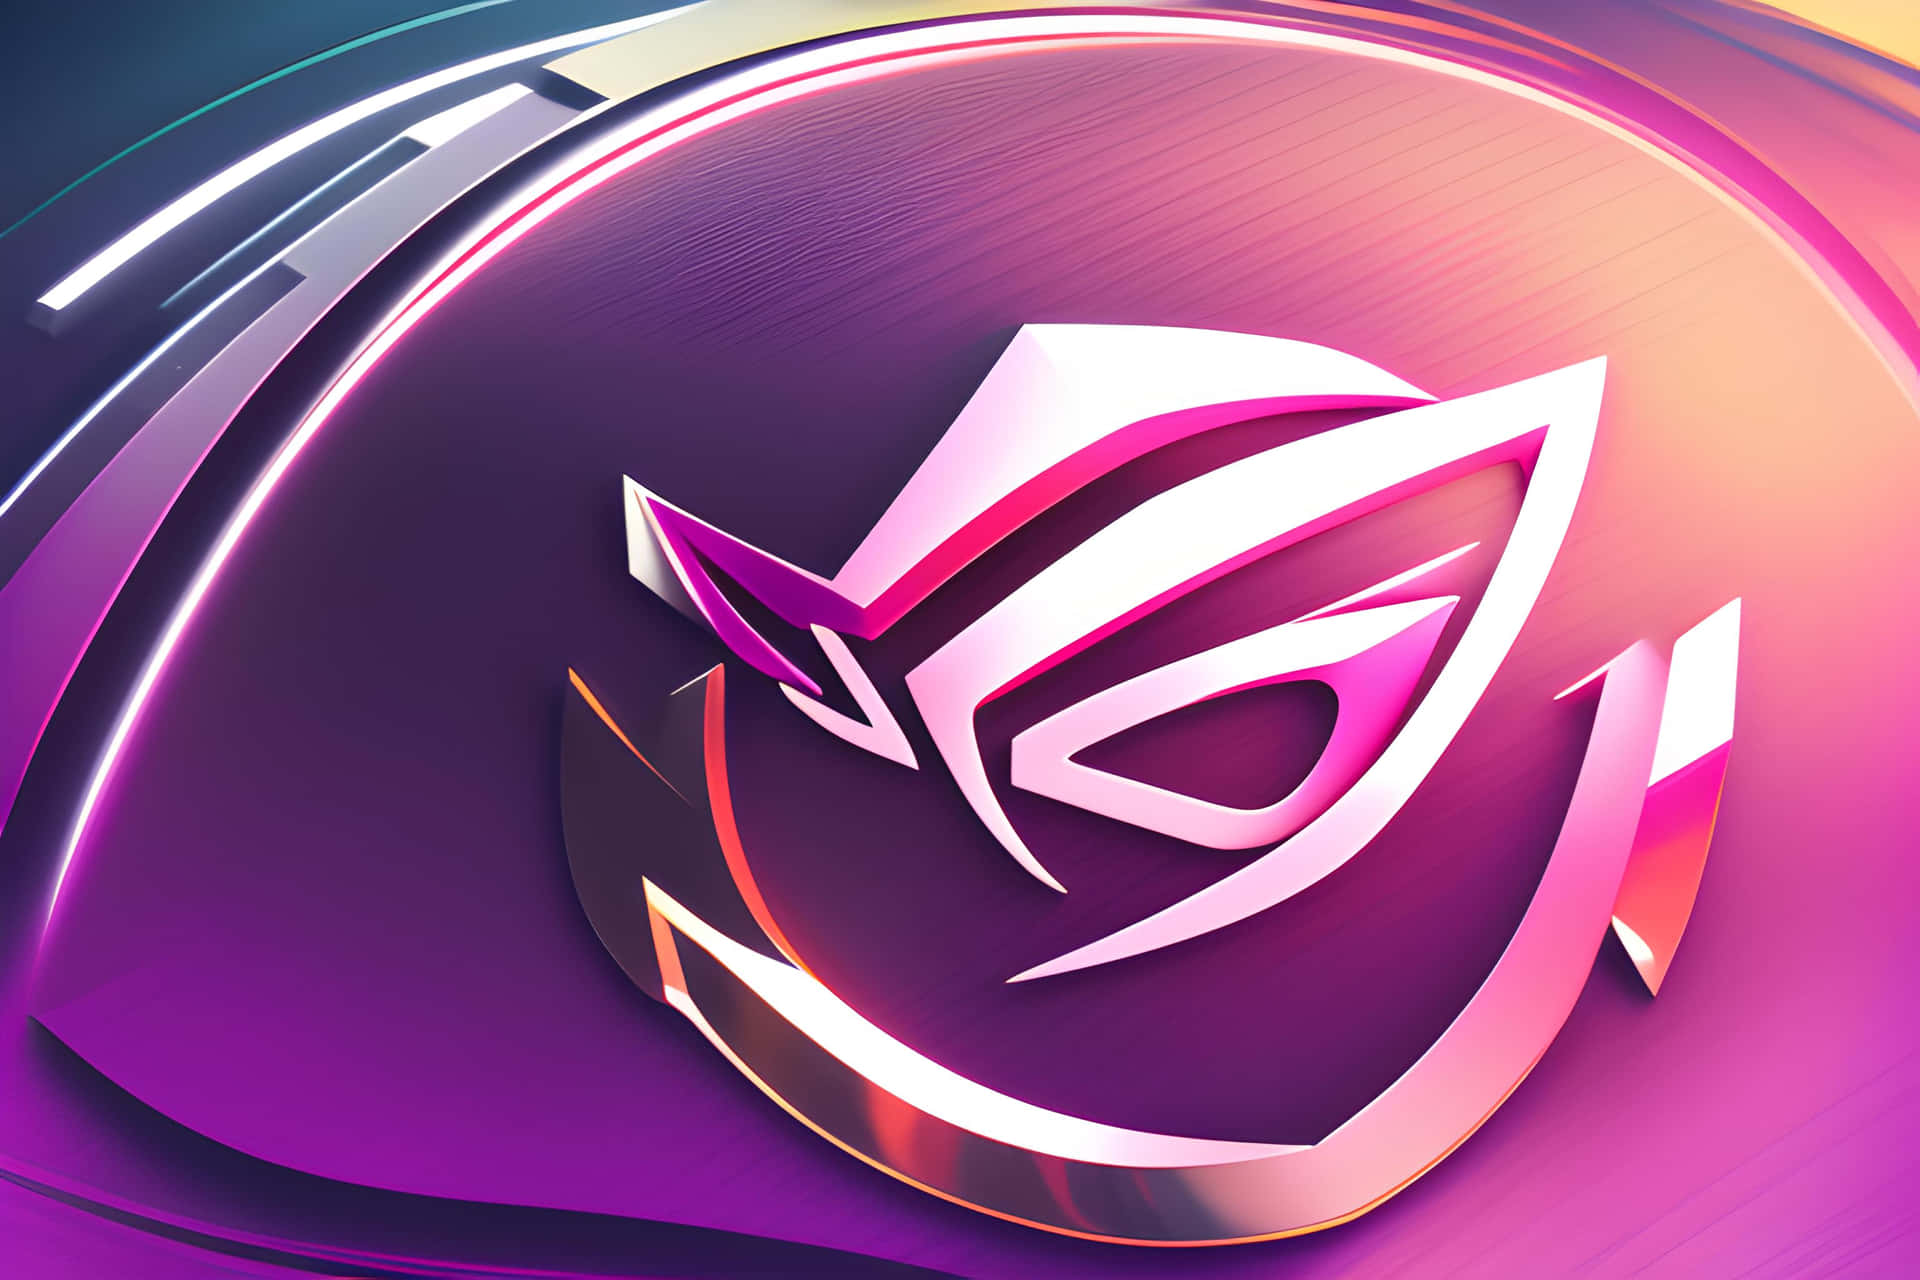 R O G Logo Colorful Background Wallpaper